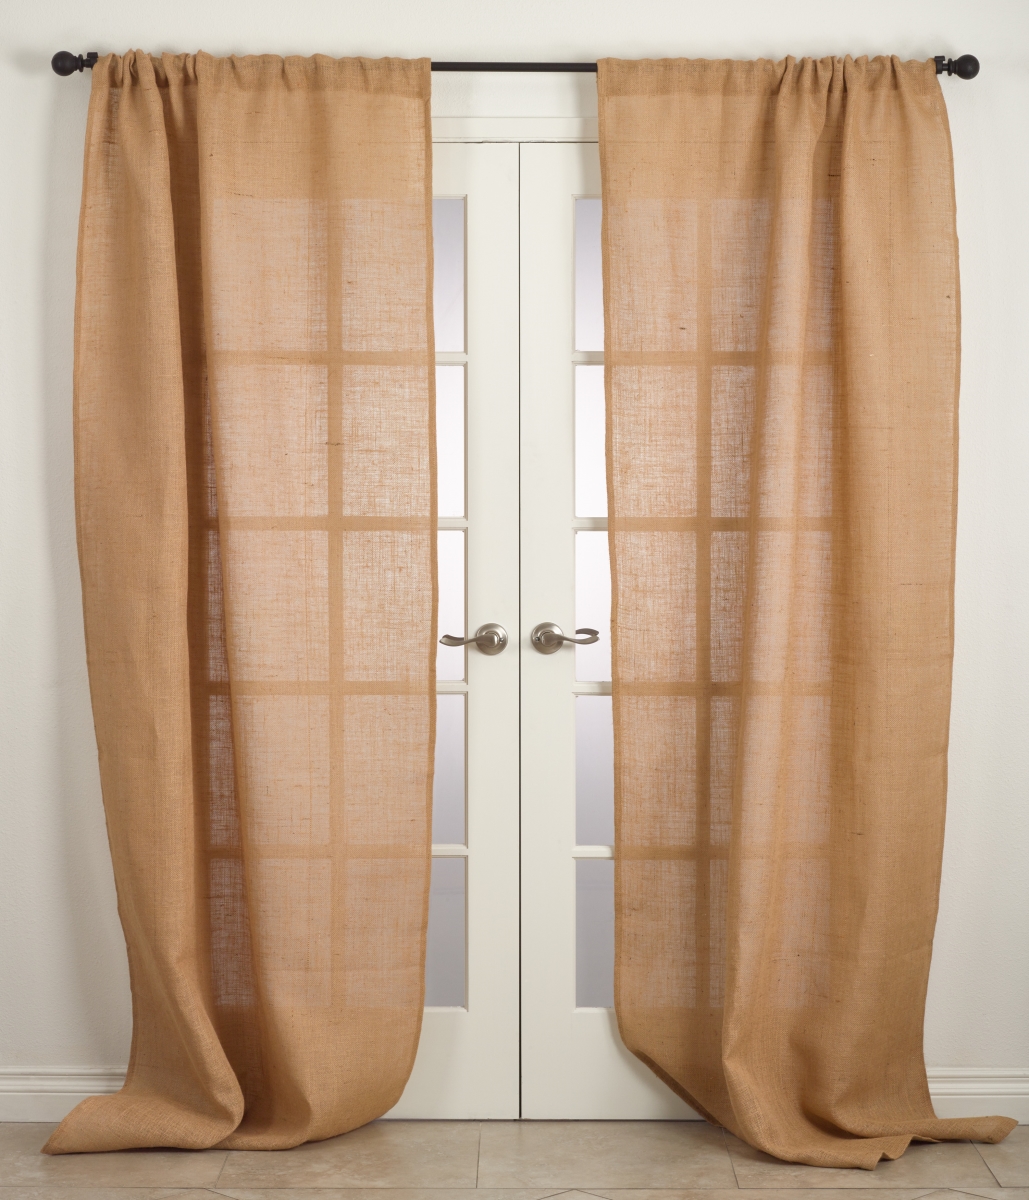 0812.n4296 Open Weave Burlap Unlined Curtain Panel - Natural